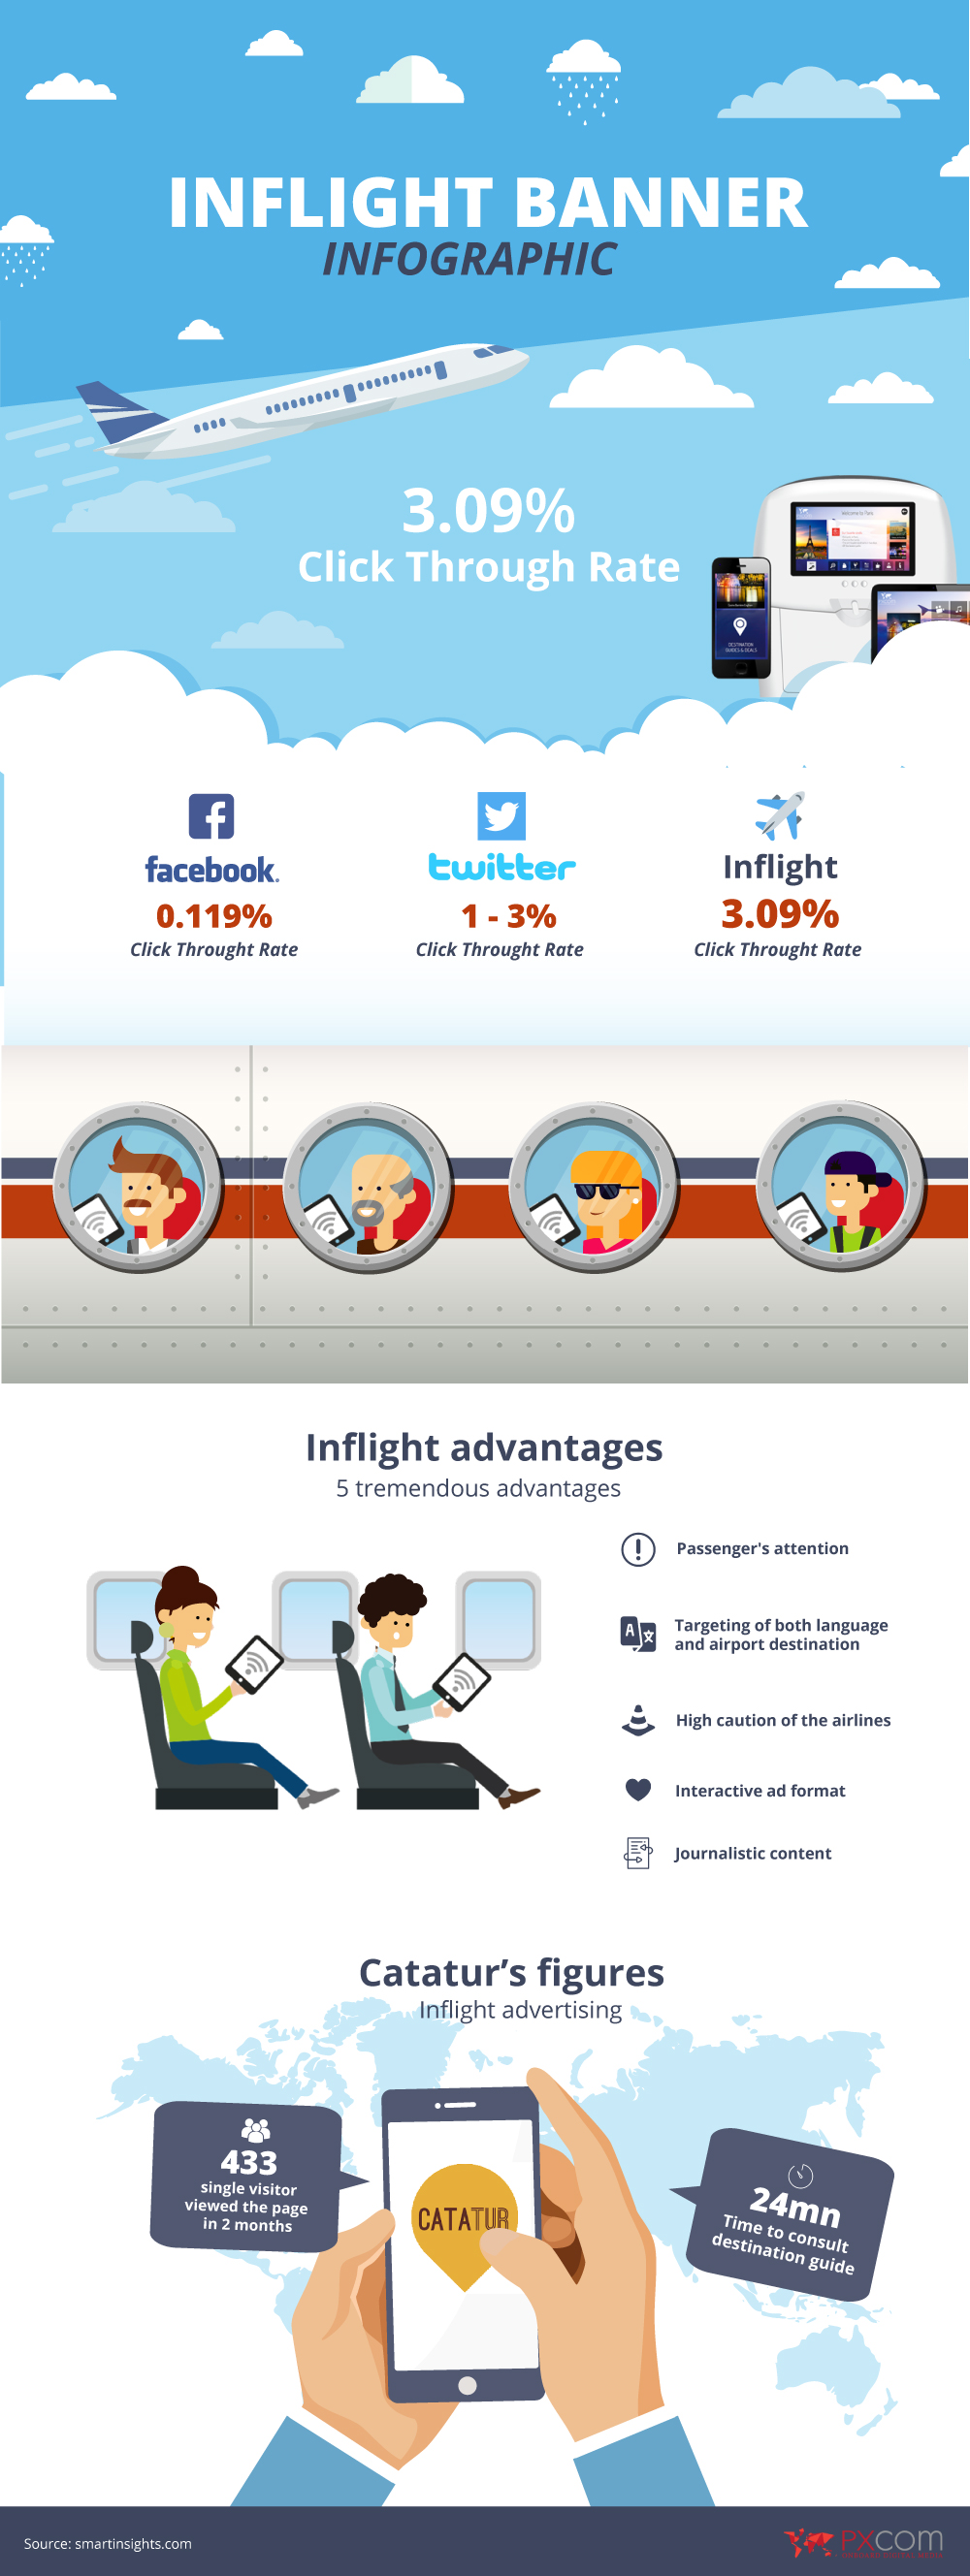 inflight banner infographic